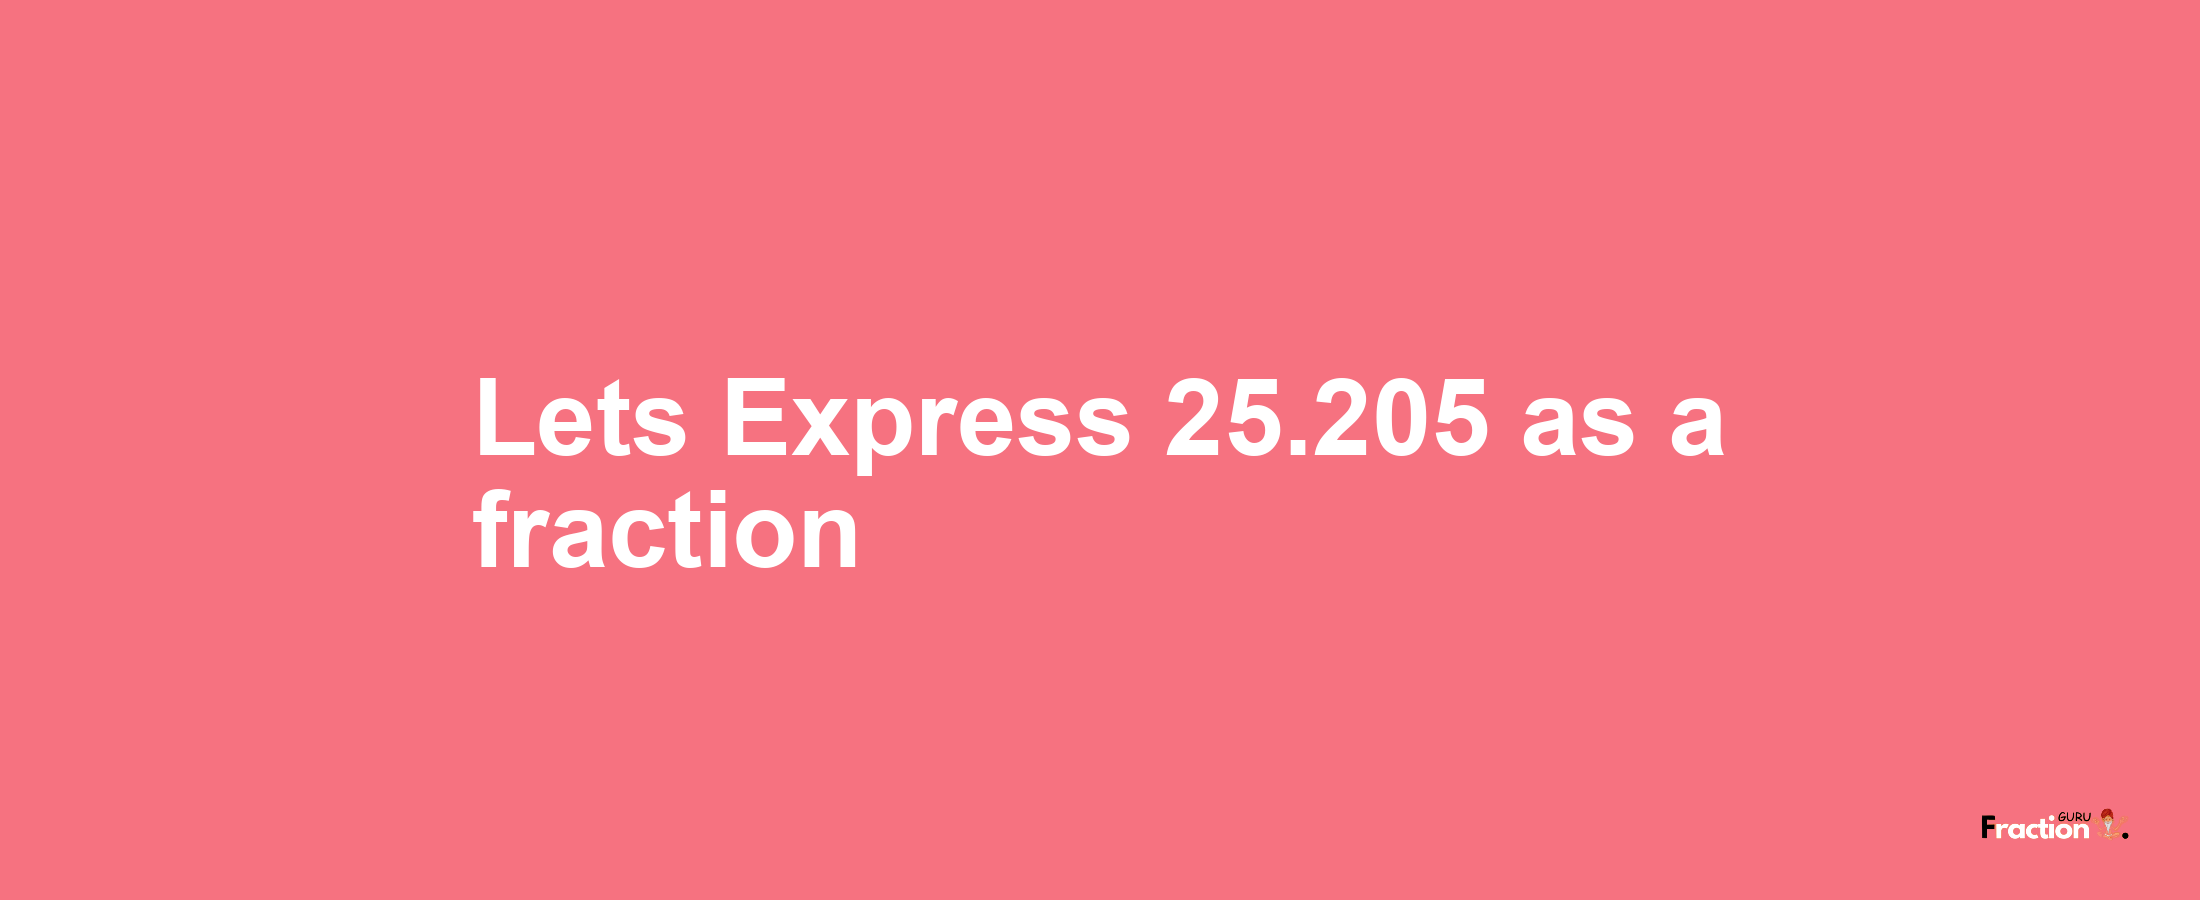 Lets Express 25.205 as afraction